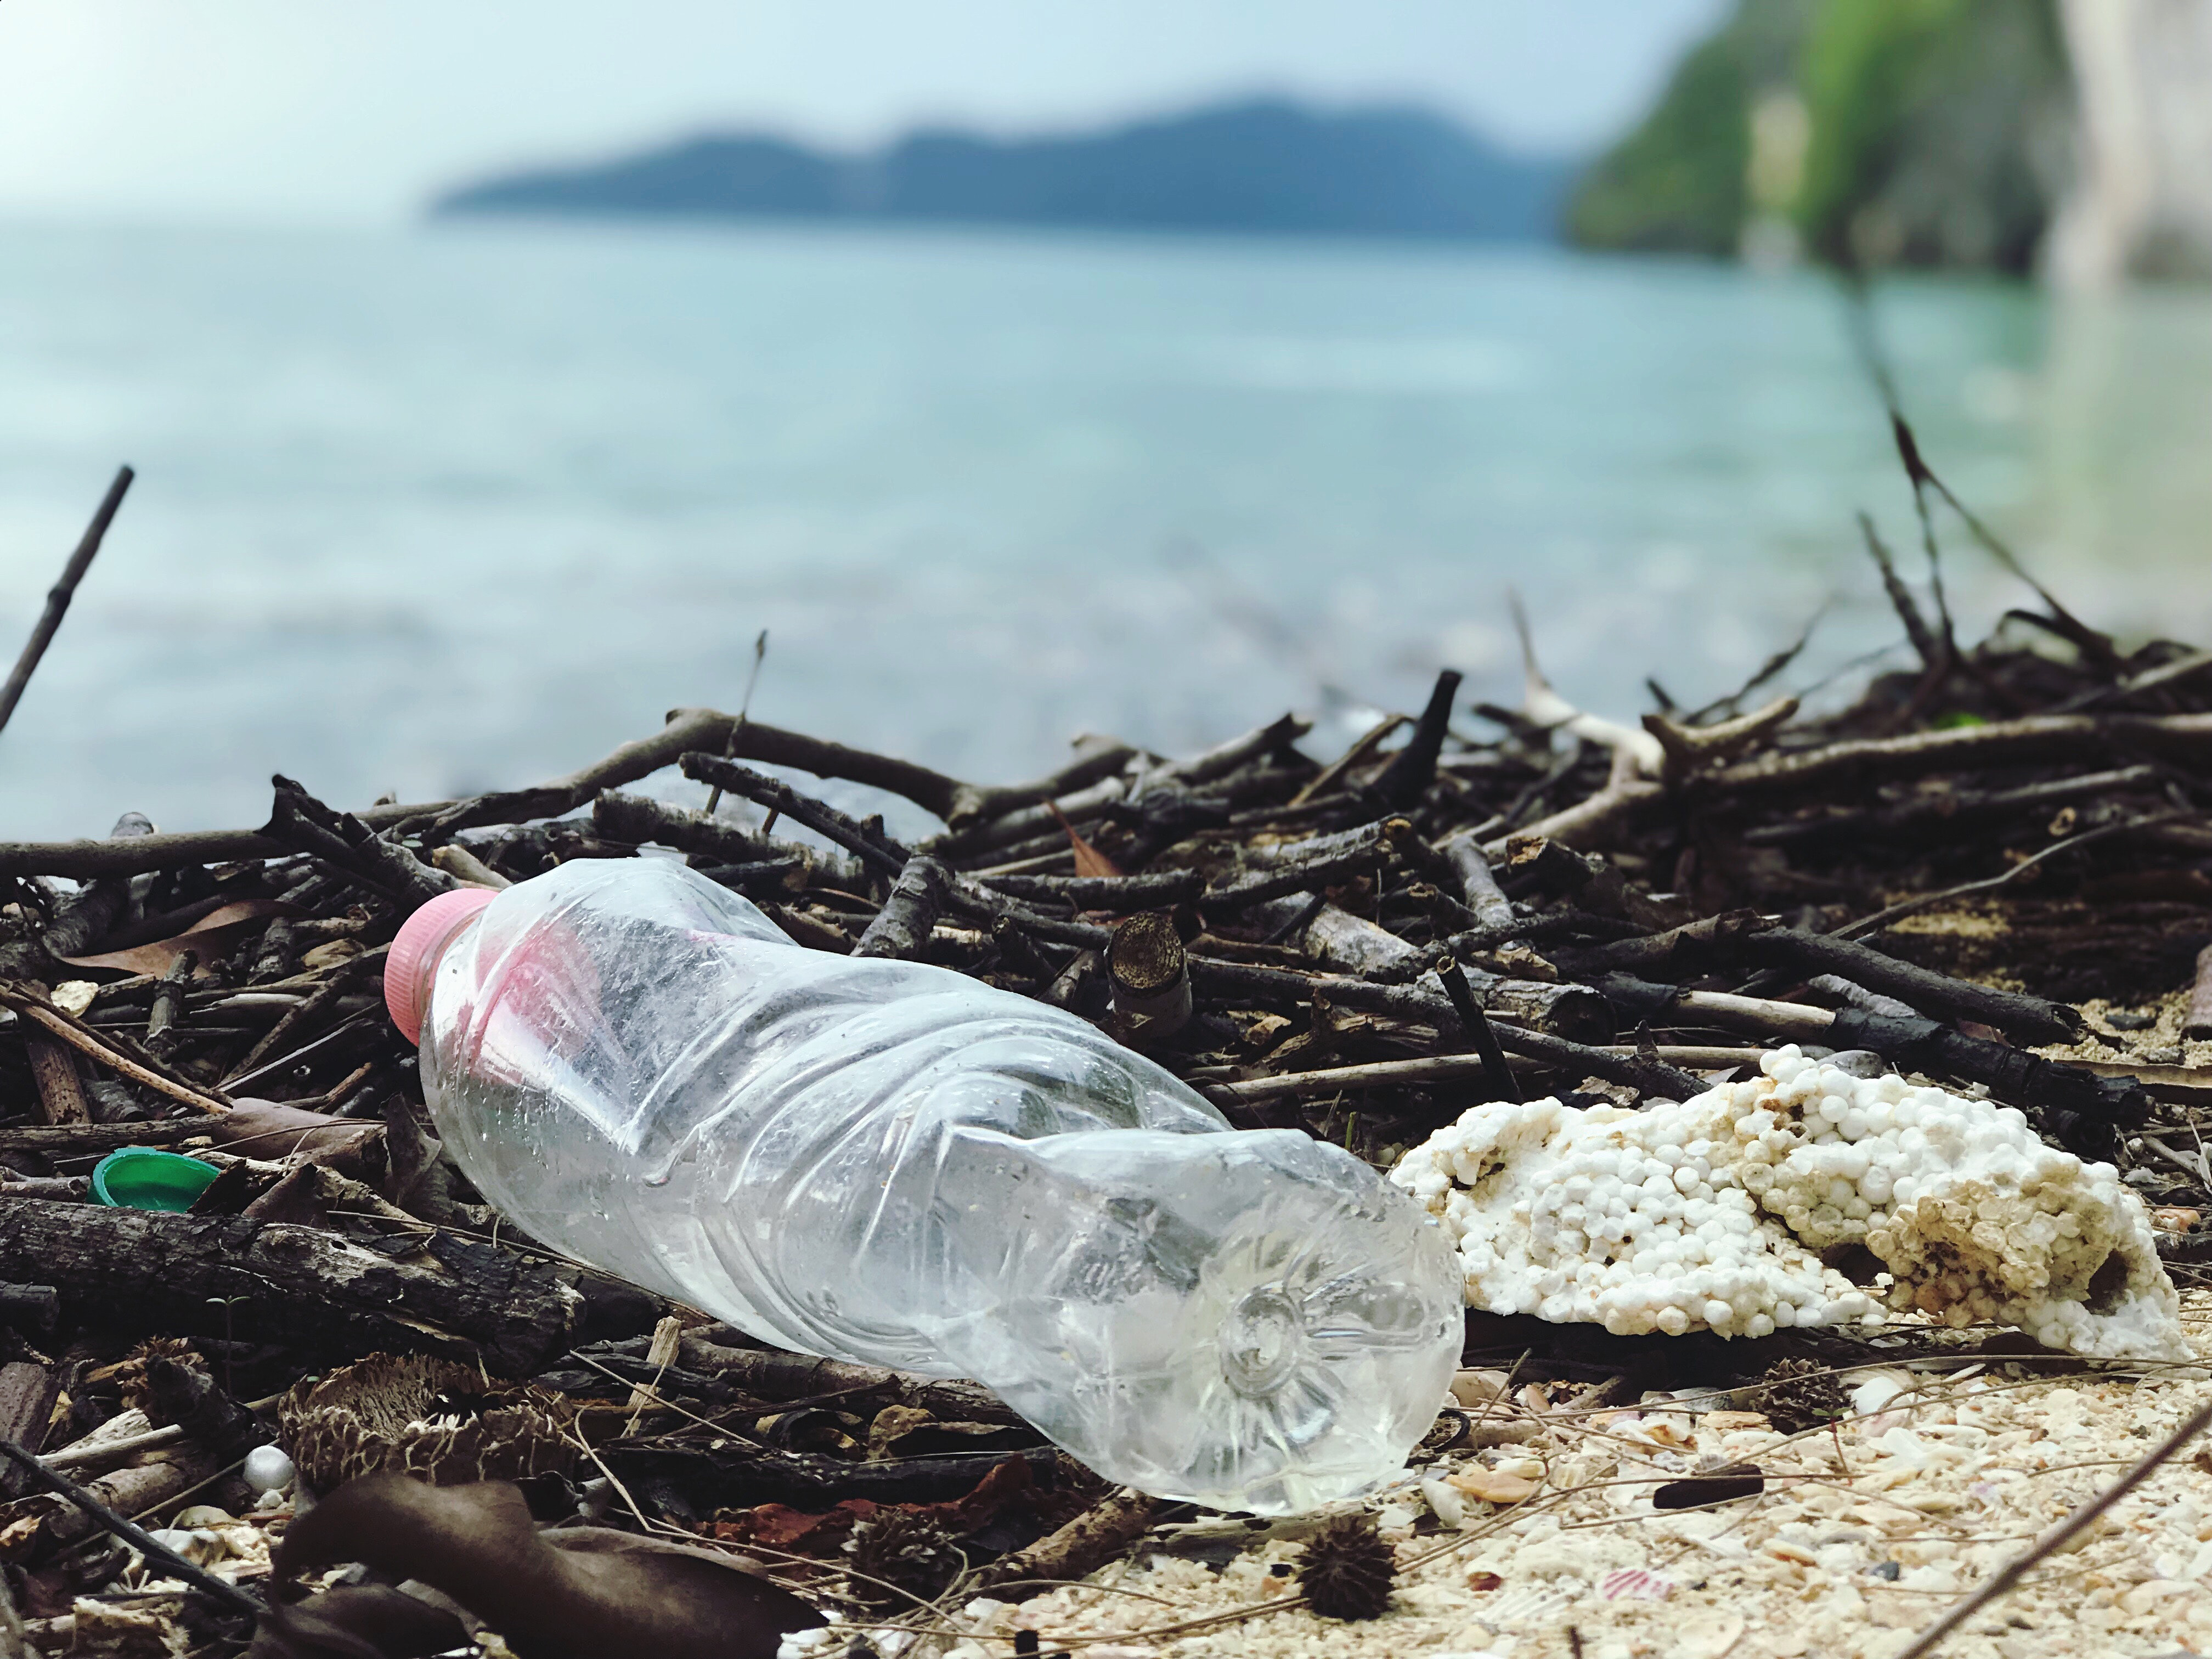 The World Is Struggling to Recycle Even 50% of Plastic Waste